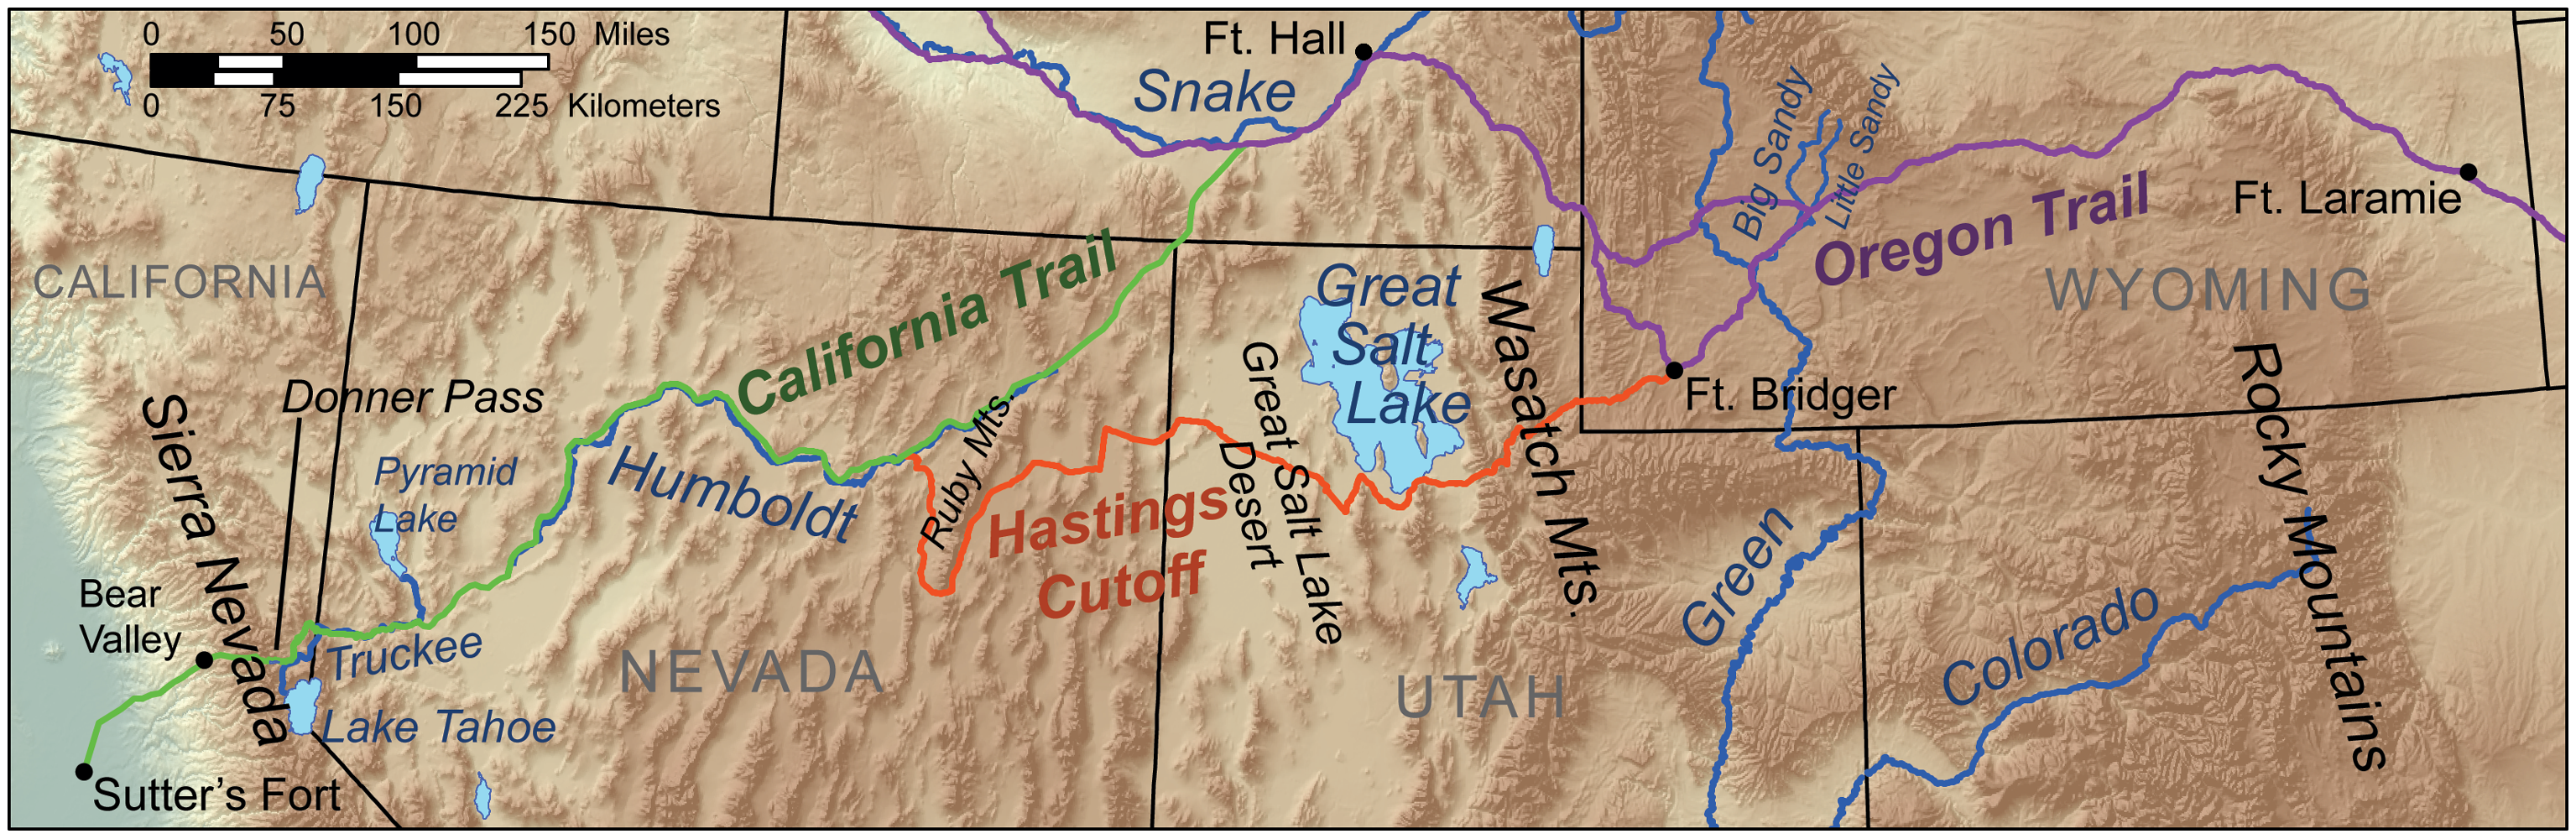 File:Donner route map.png - Wikimedia Commons